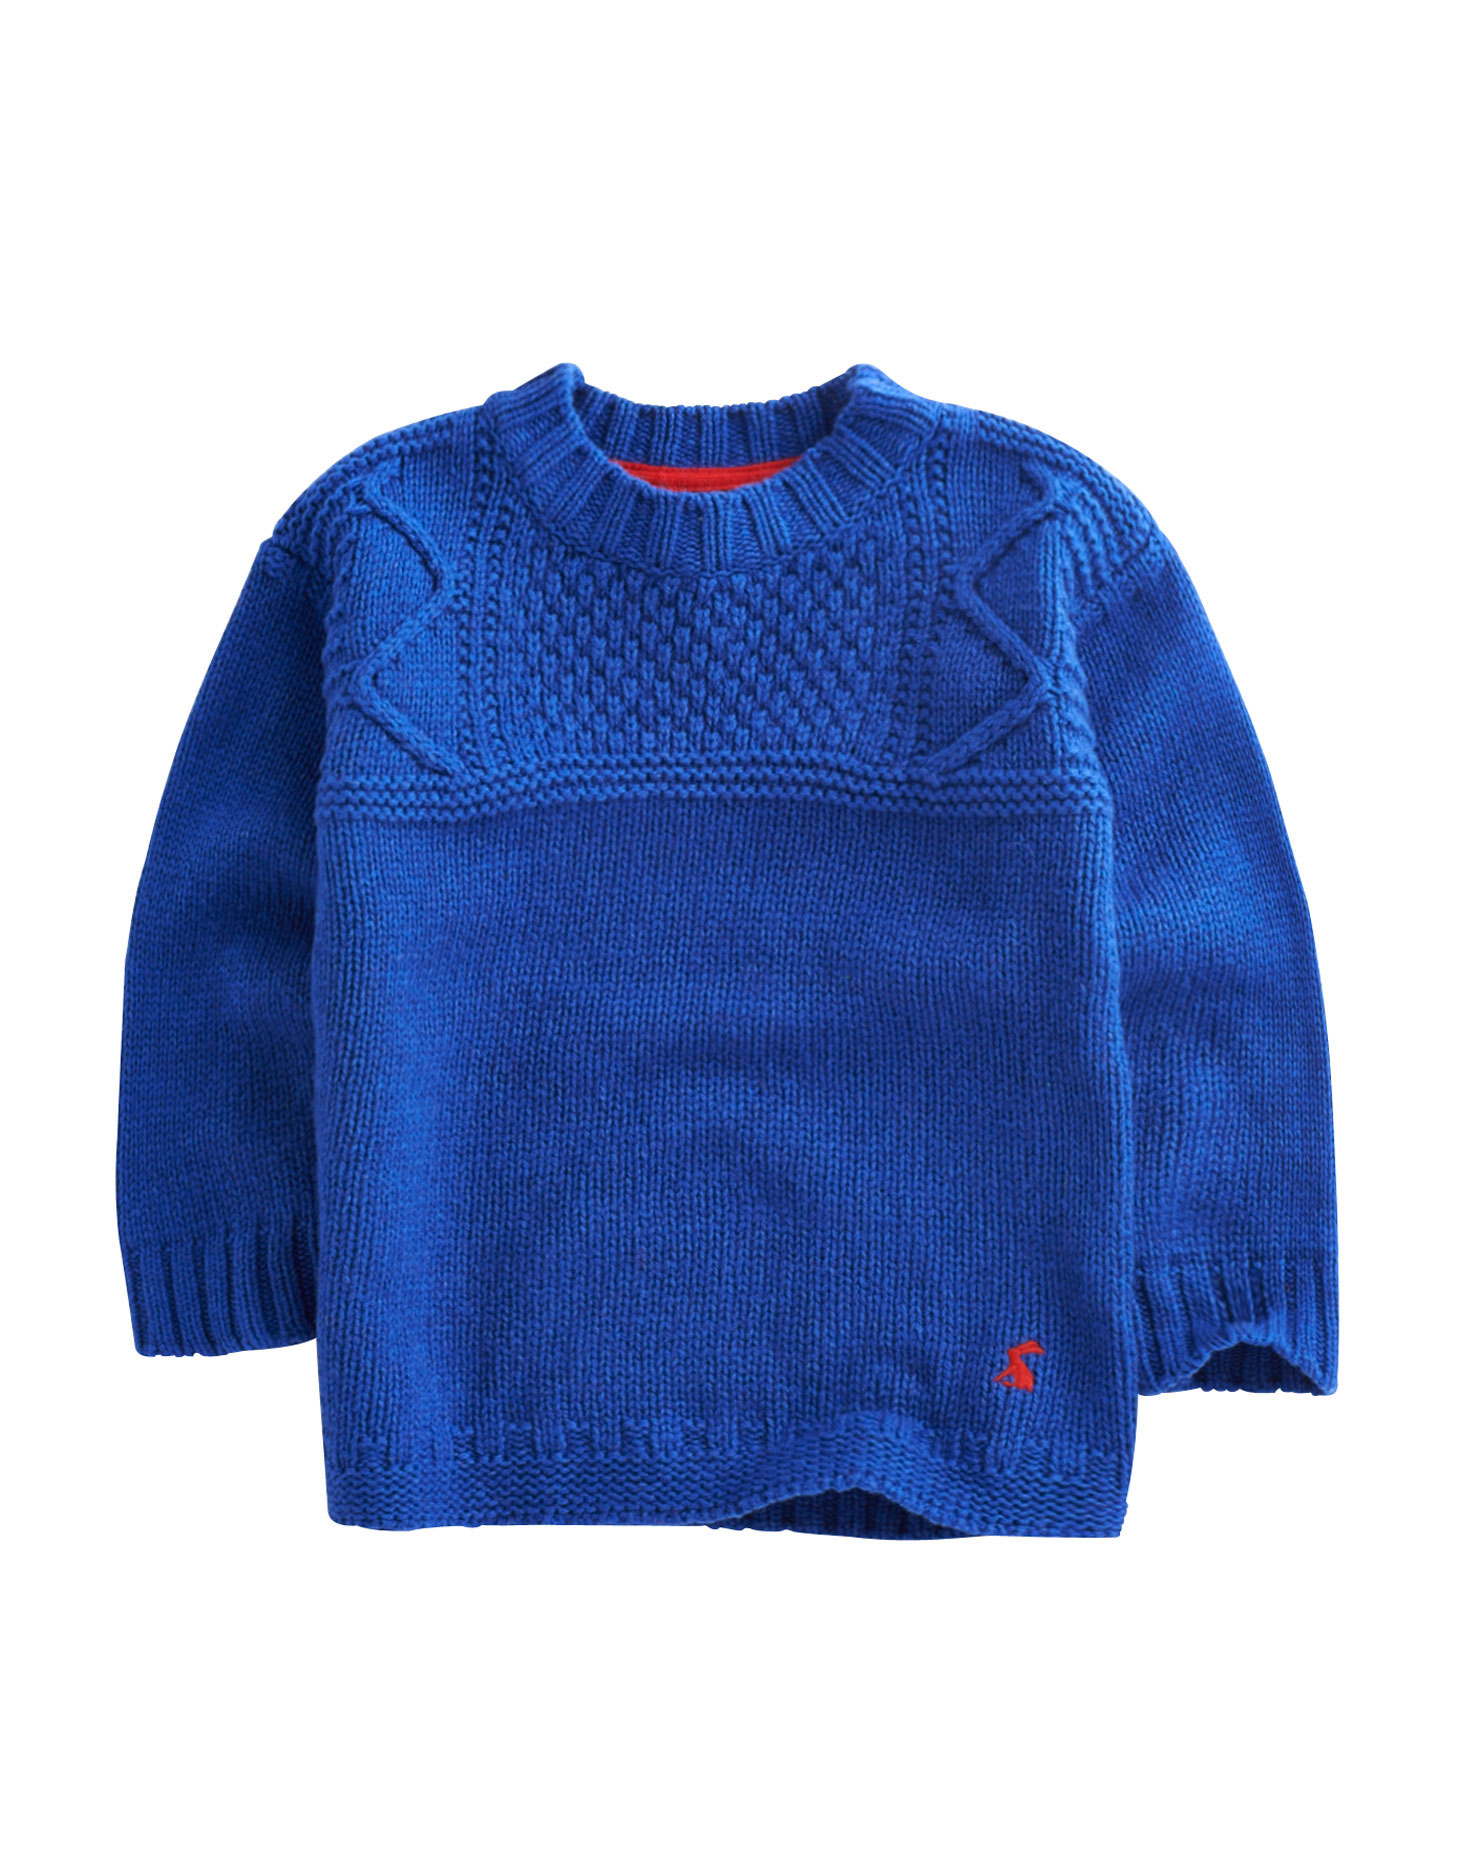 Best of Joules Kids AW13 - StyleNest